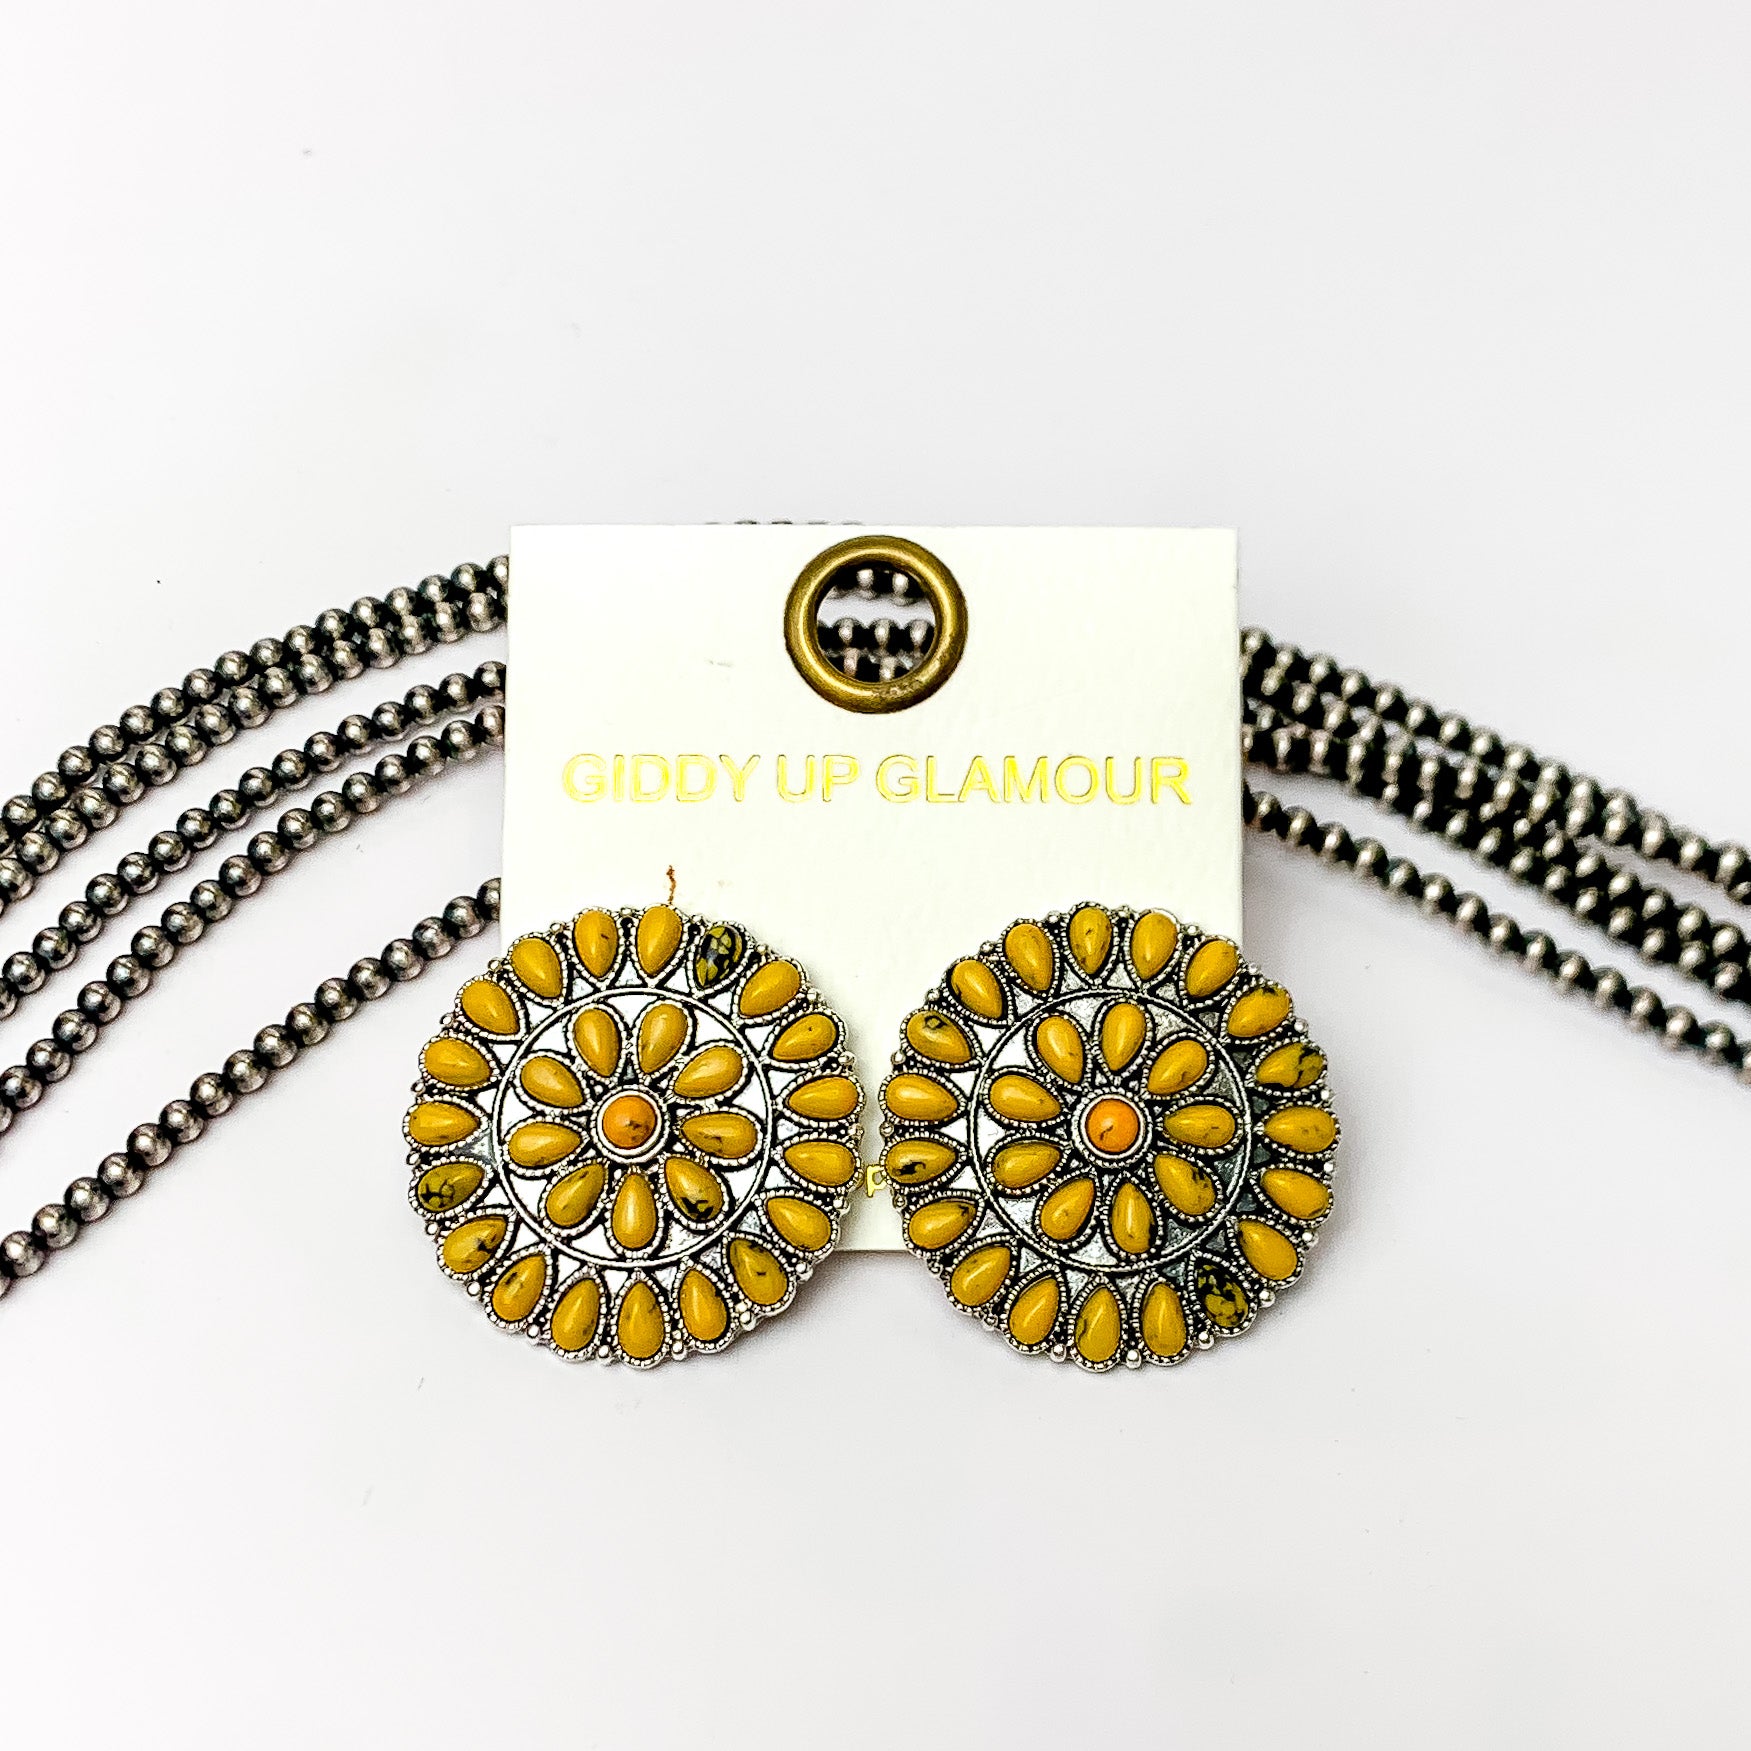 Silver Tone Circle Cluster Stud Earrings with Yellow Stones. Pictured on a white background with beads through the background.